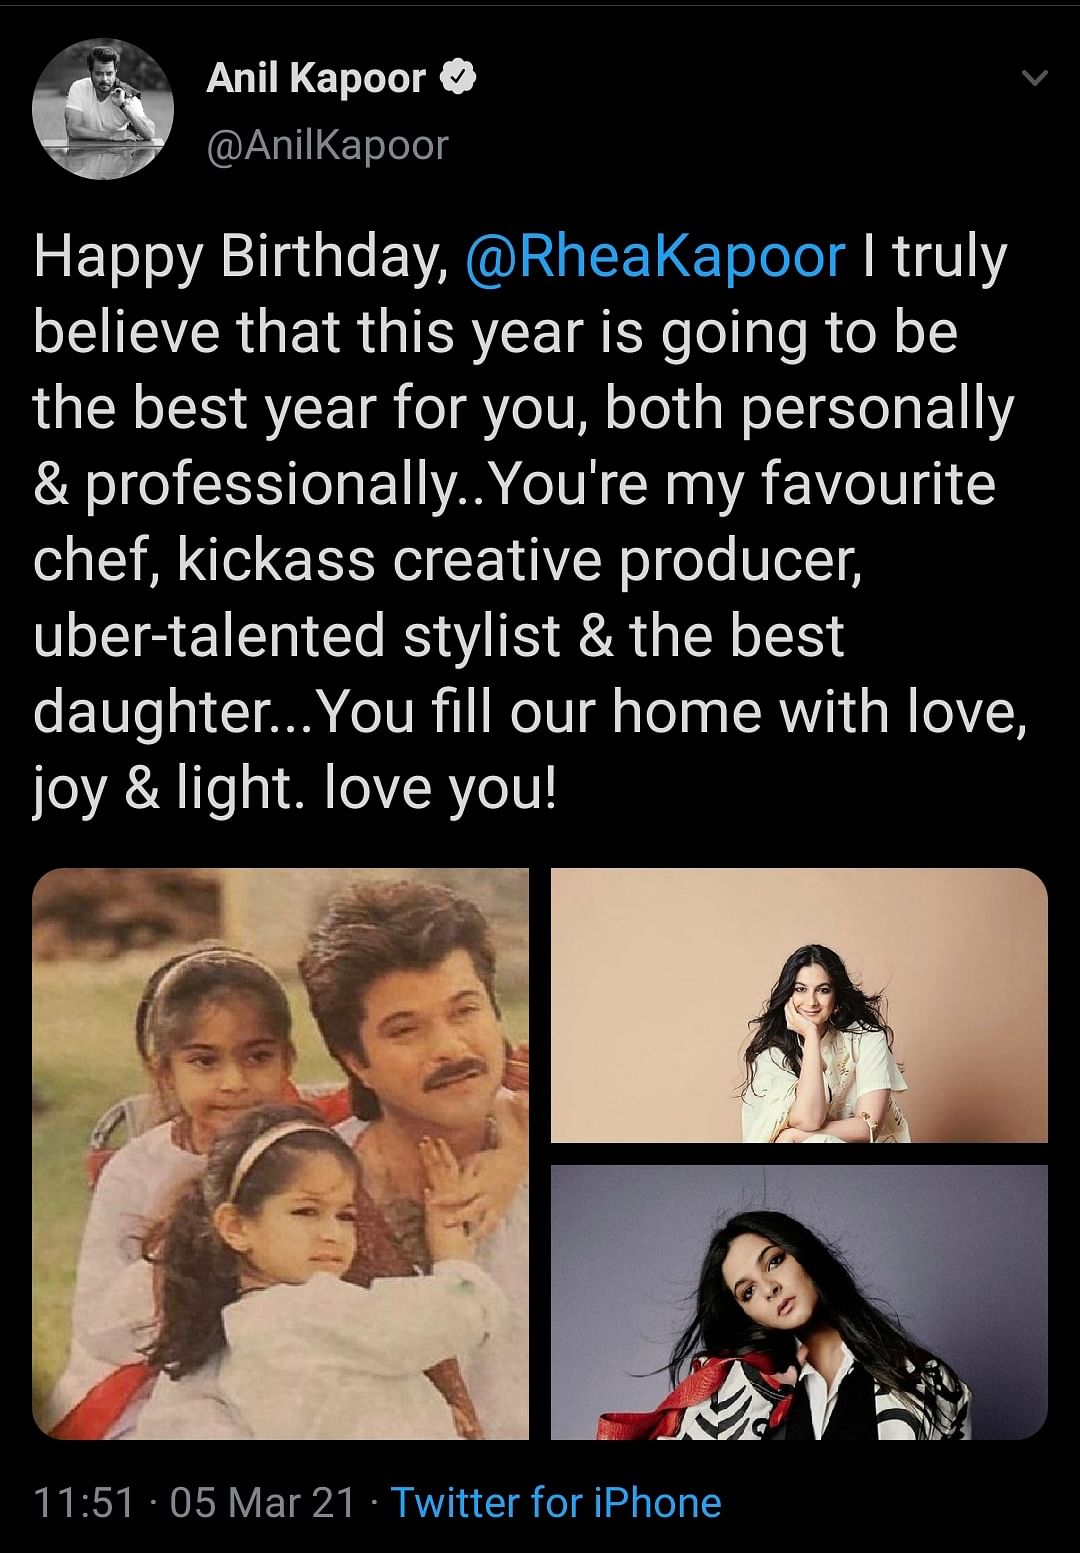 Anil Kapoor wishes daughter Rhea Kapoor on birthday, call her his ‘favourite chef’